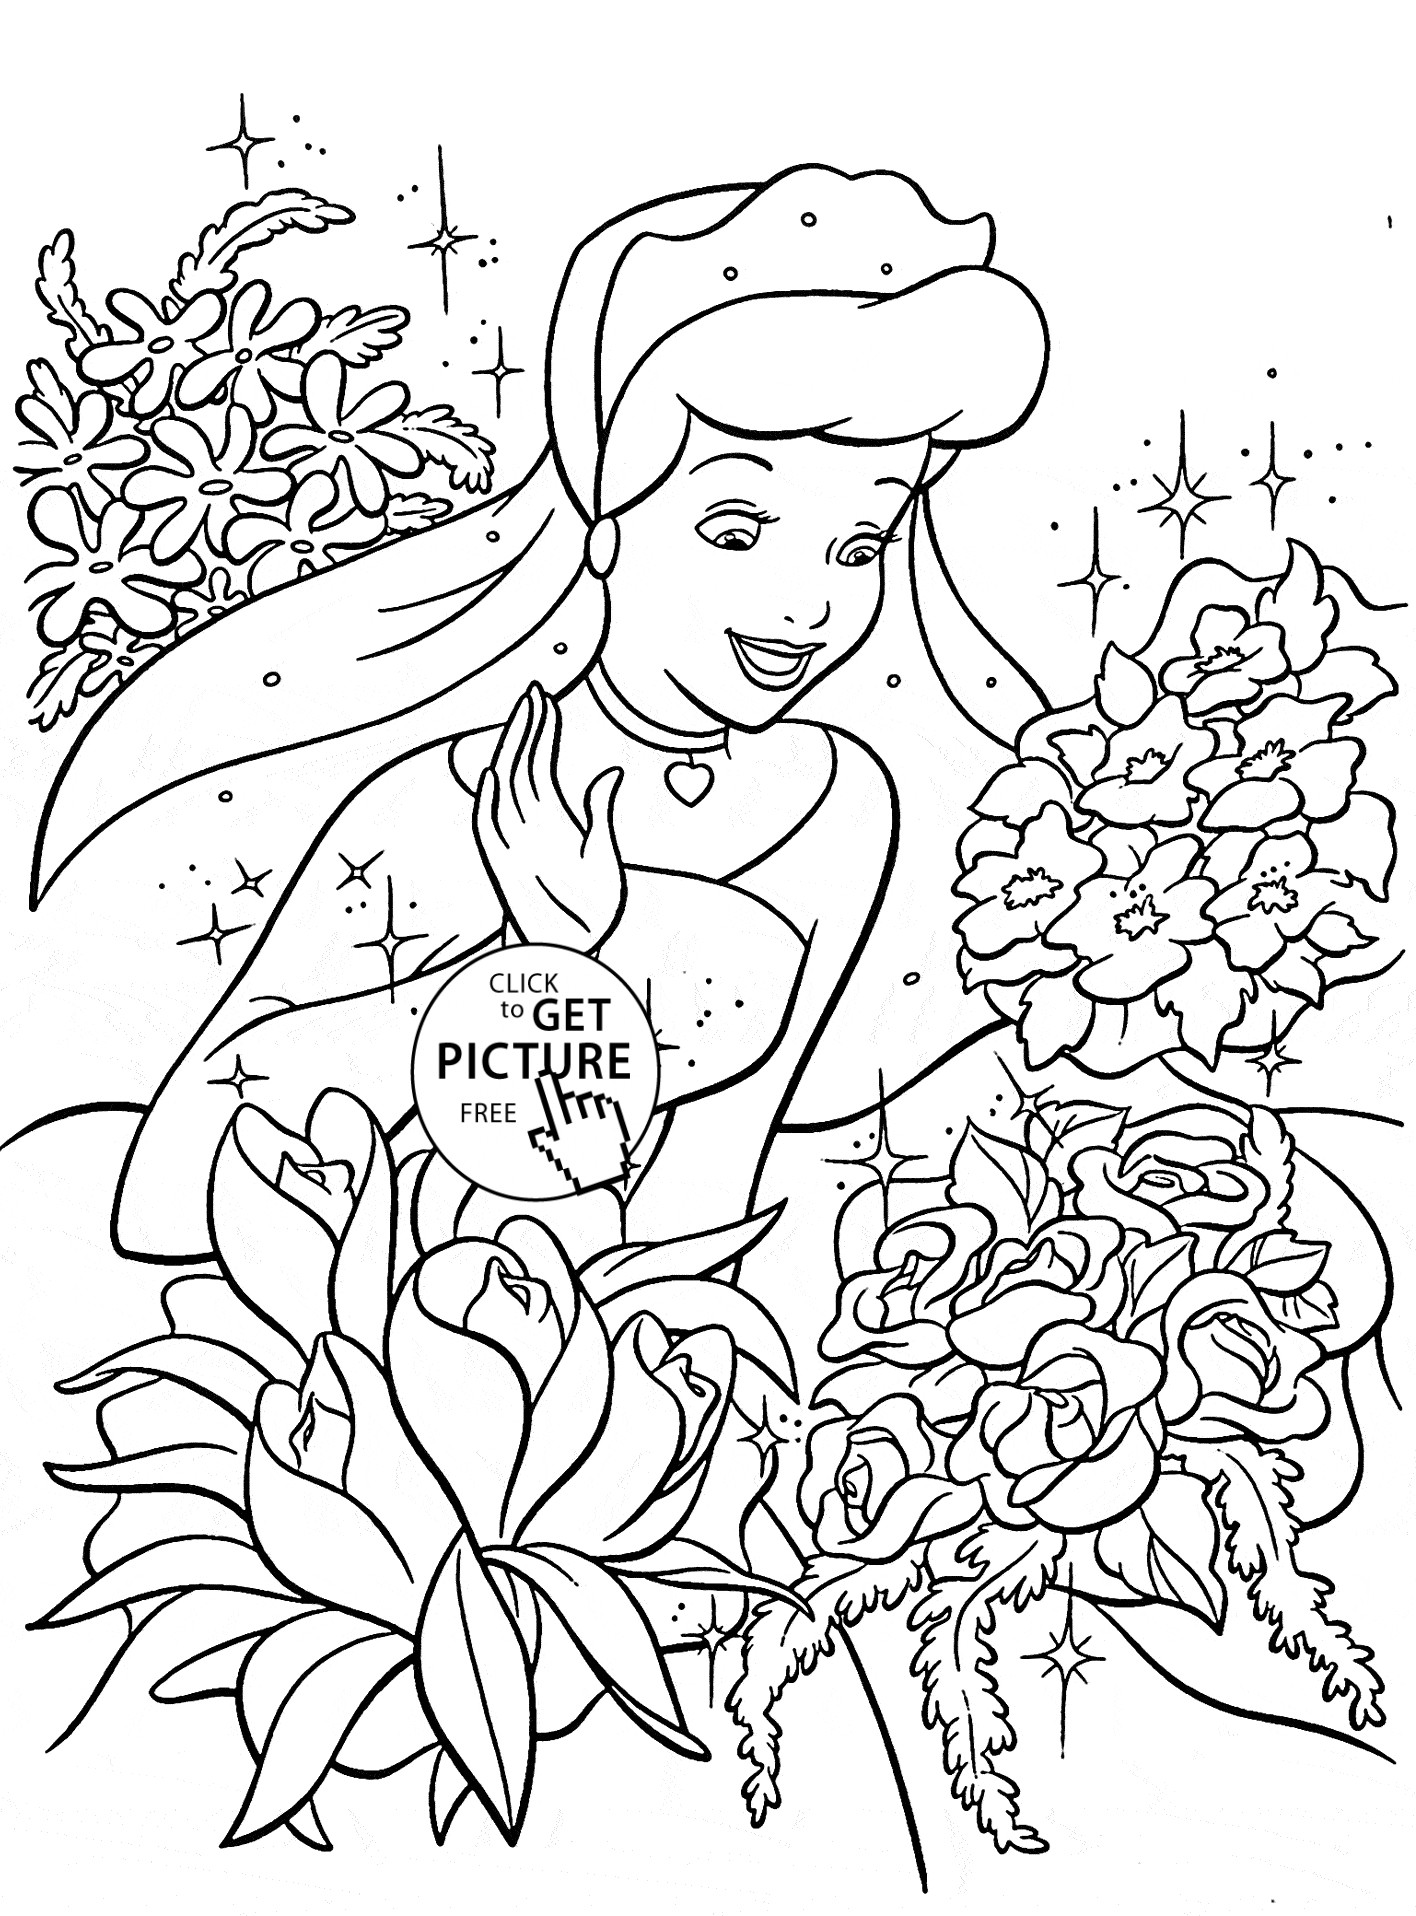 Princess Cinderella and many flowers coloring page for kids disney princess coloring pages printables free Wuppsy